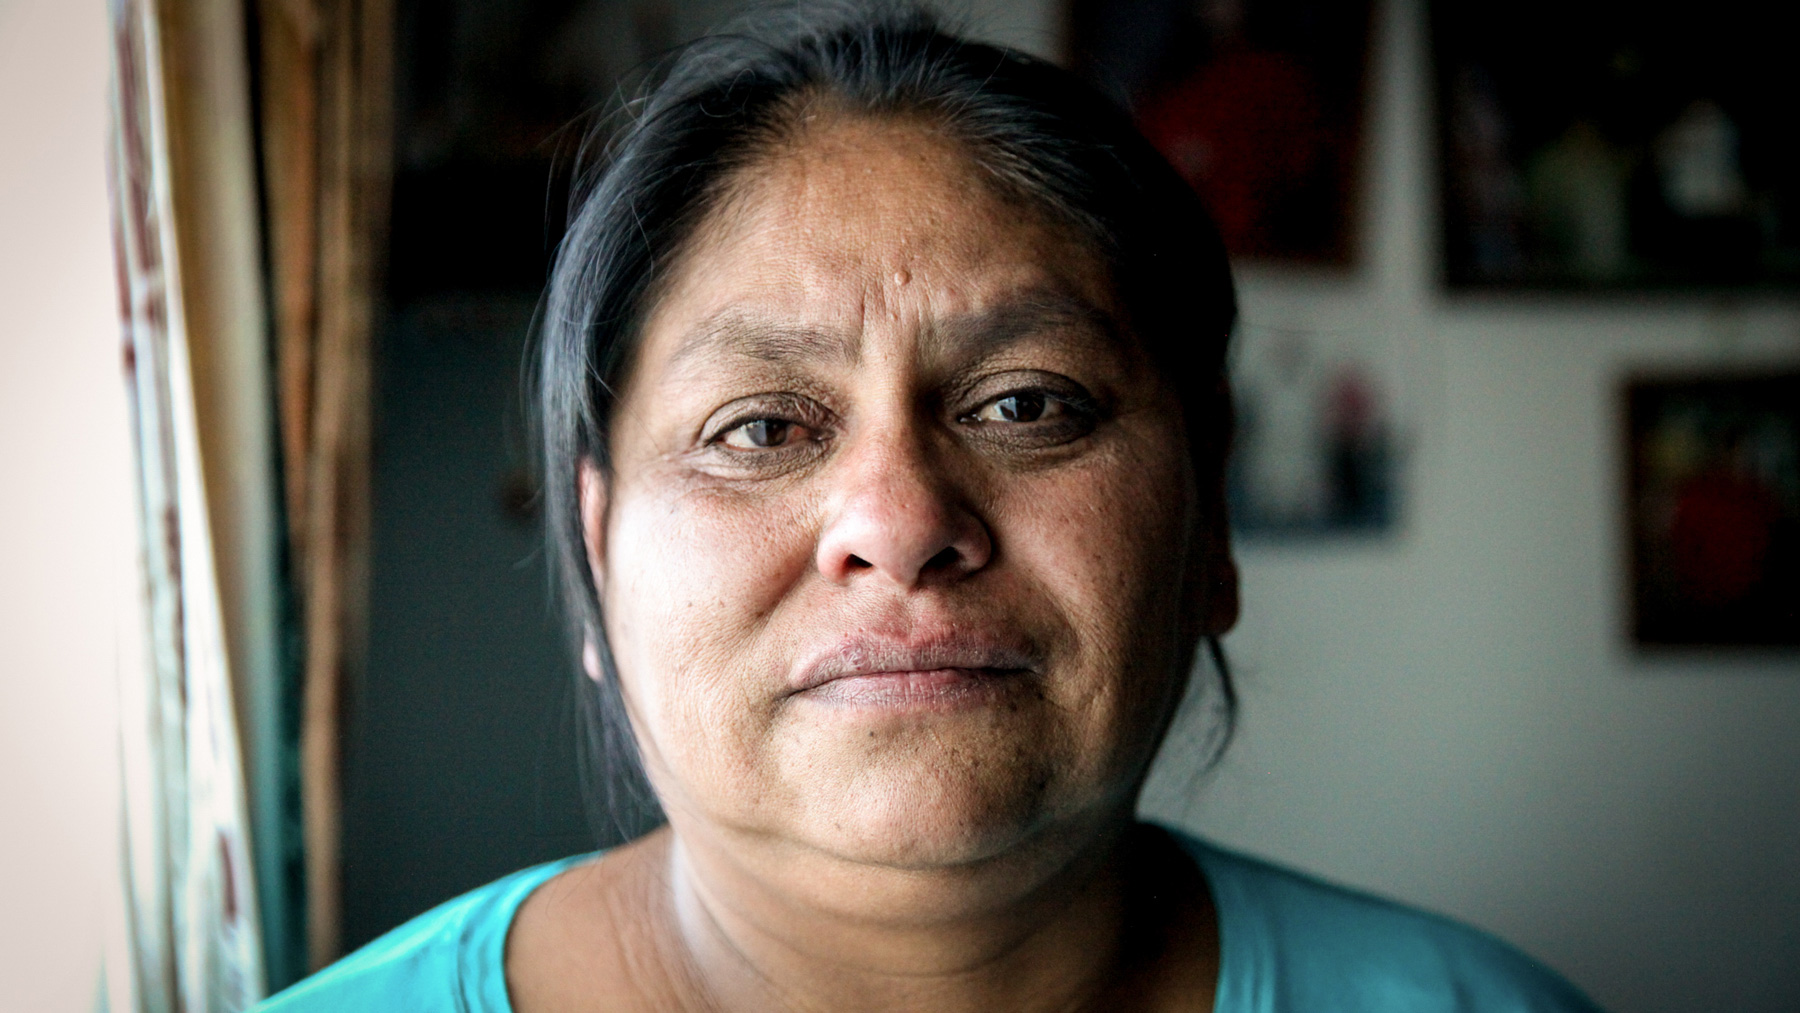 Yolanda Badback is one of the few White Mesa, Utah, residents from the Ute Mountain Ute tribe who is organizing and protesting against the White Mesa Mill. (Maria Esquinca/News21)